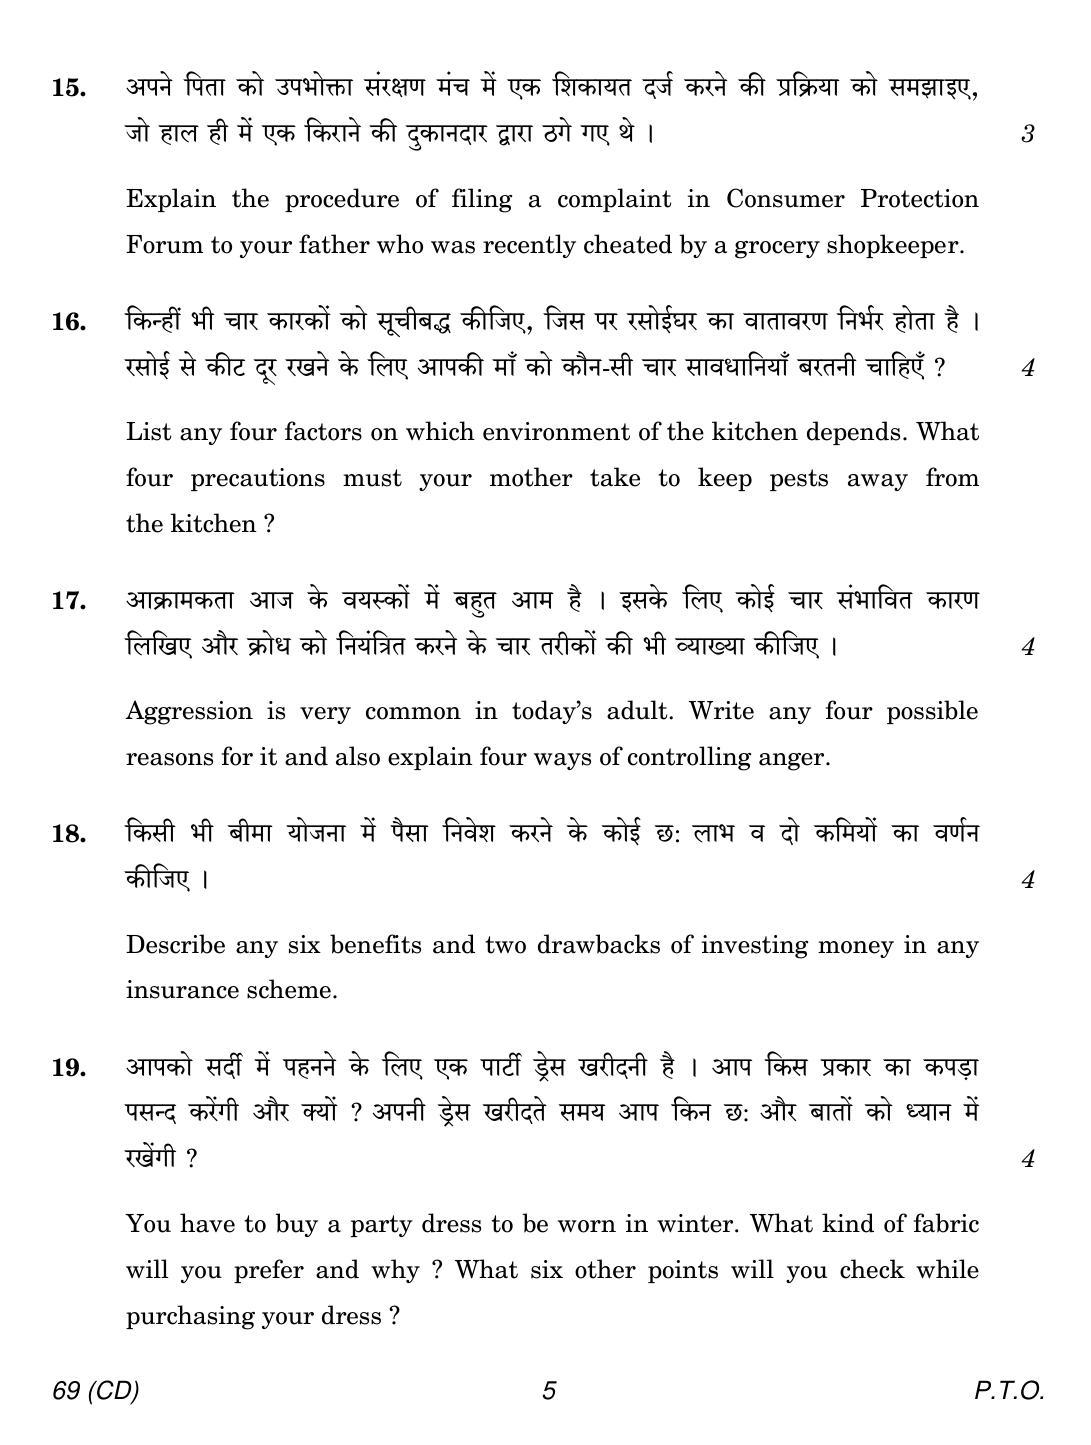 CBSE Class 12 69 HOME SCIENCE CD 2018 Question Paper - Page 5